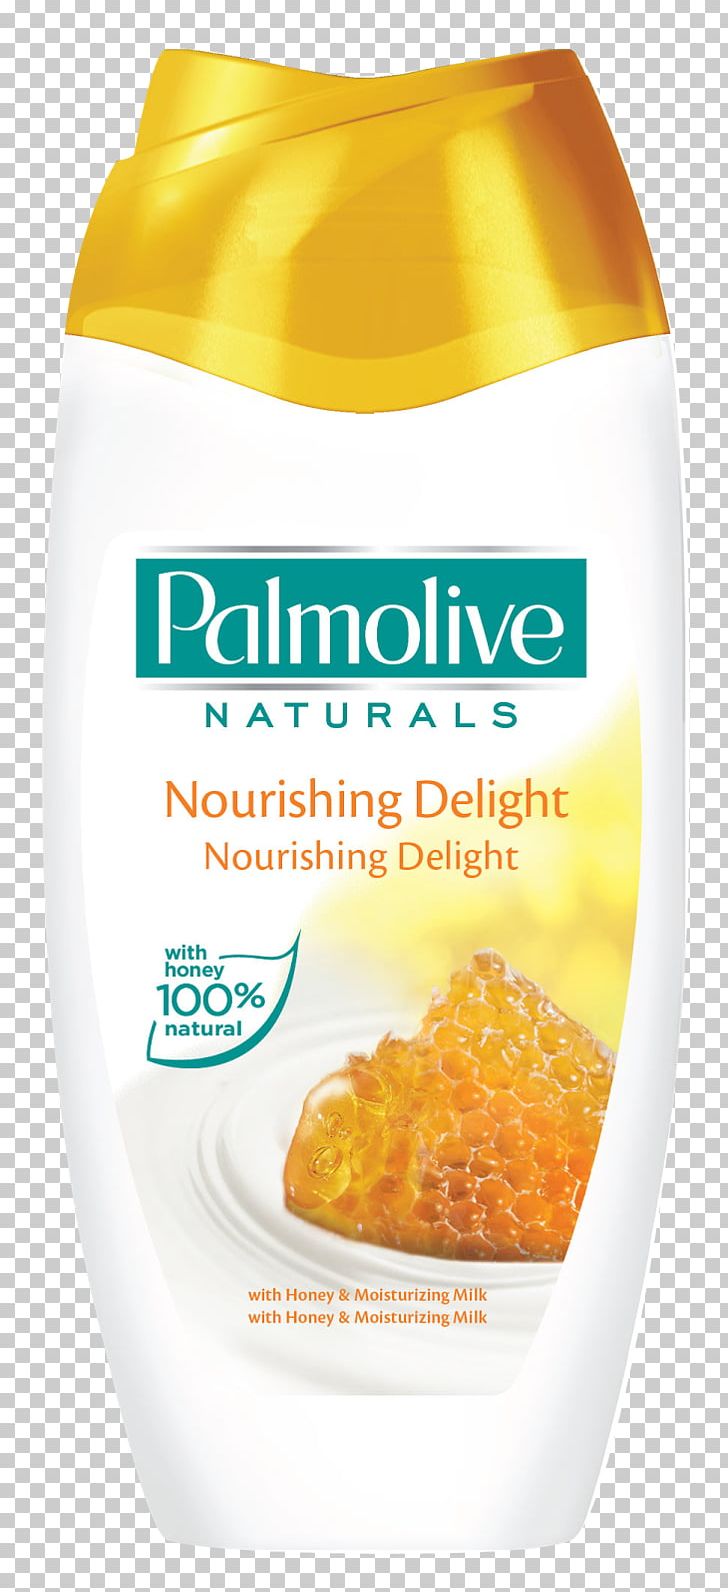 Lotion Shower Gel Palmolive Cosmetics Soap PNG, Clipart, Bathing, Cleanser, Cosmetics, Exfoliation, Flavor Free PNG Download